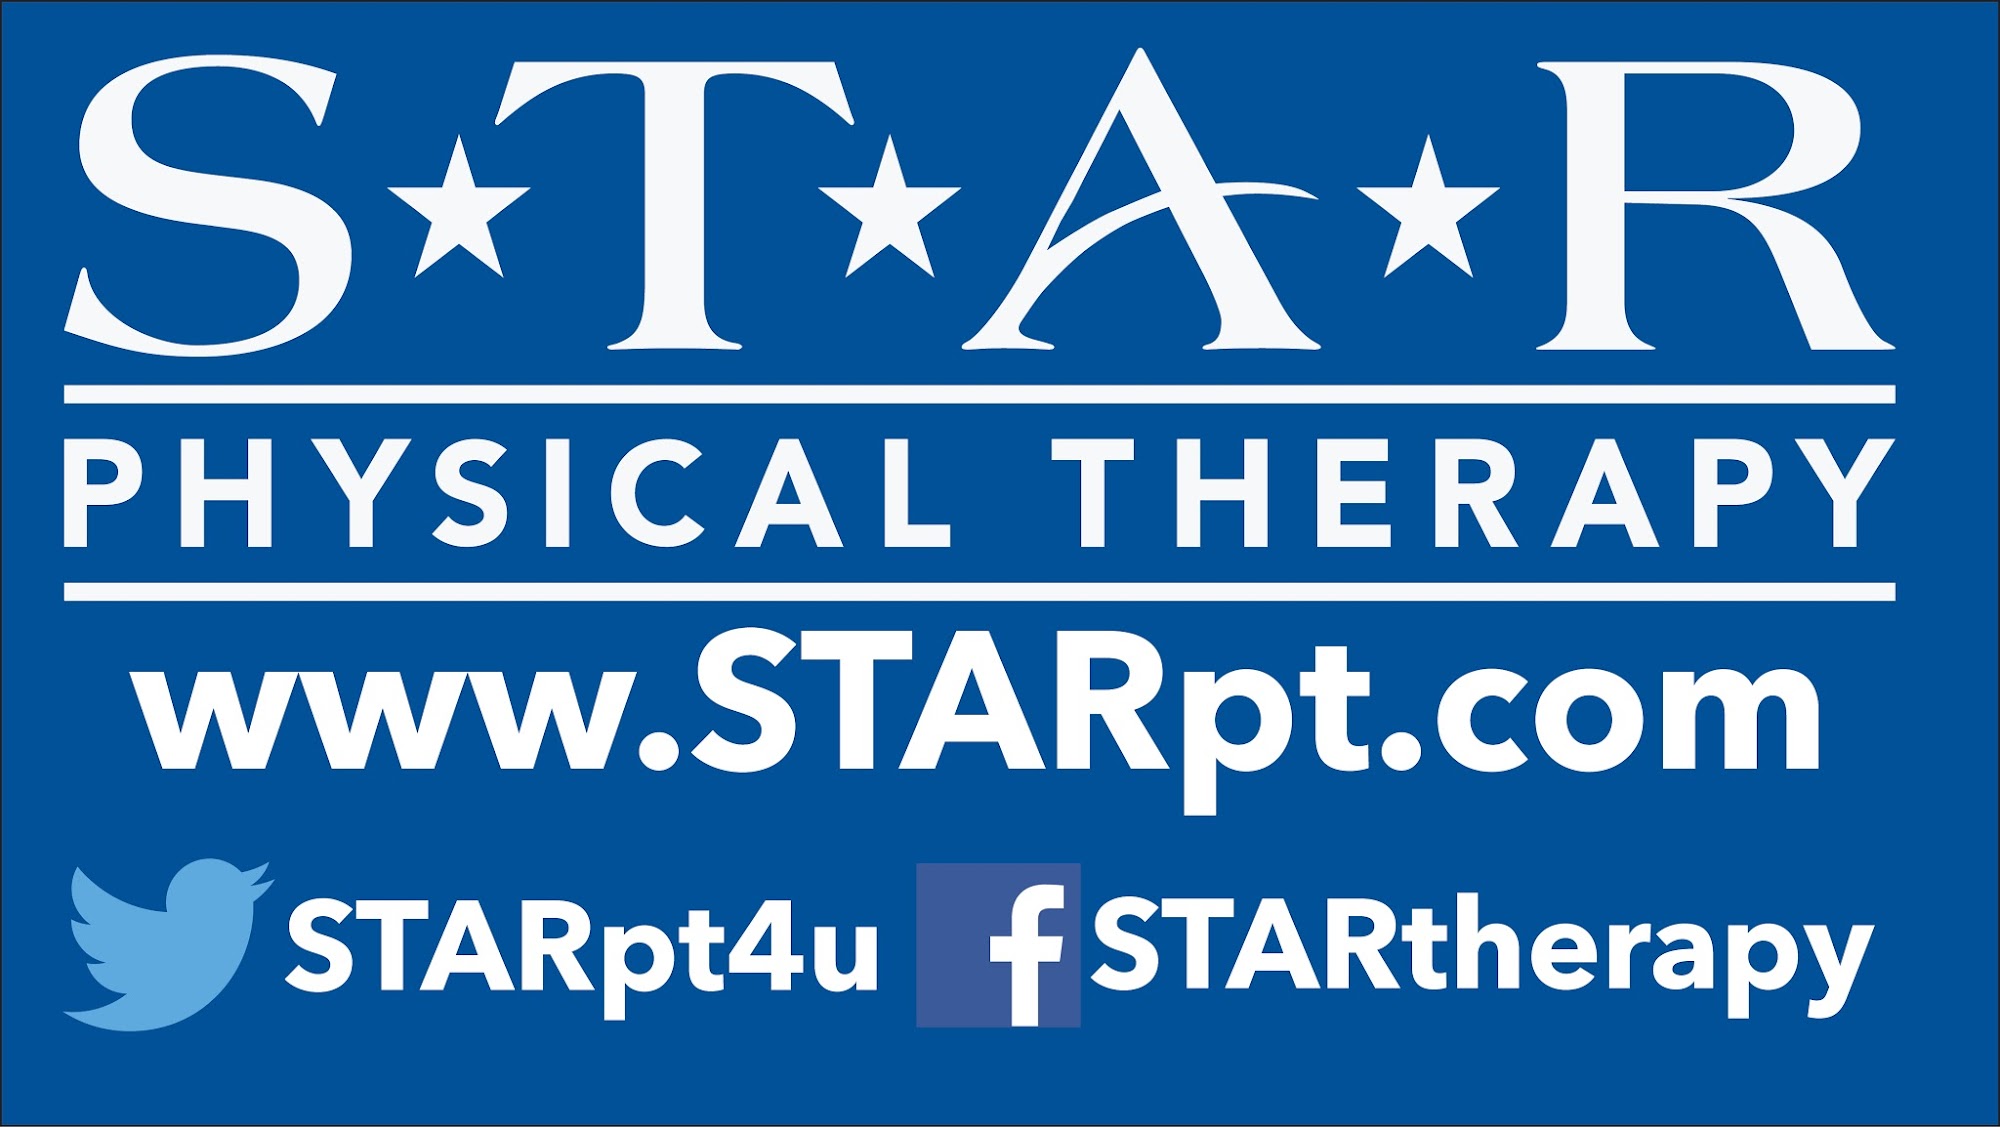 STAR Physical Therapy 481 US-51, Ripley Tennessee 38063